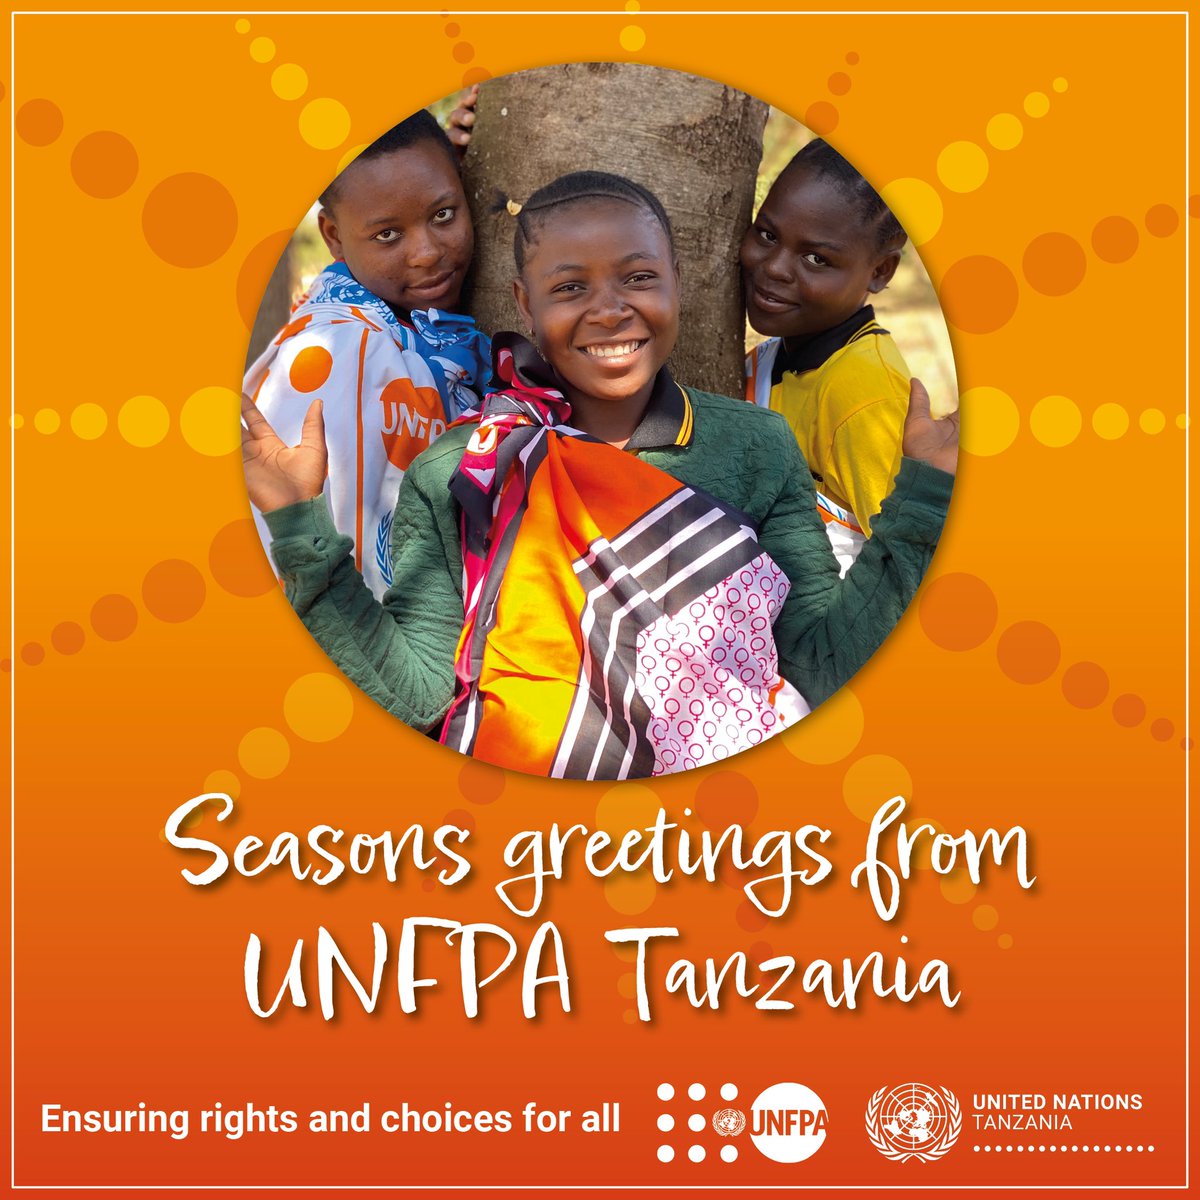 Deep appreciation and heartfelt gratitude for the strong #partnership in advancing #RightAndChoices in 2021.

#SeasonsGreetings from @UNFPATanzania for a wonderful holiday season 🎉 and a happy and healthy 2022.

Stay safe and well.

#SDGs #NoExceptionsNoExclusions